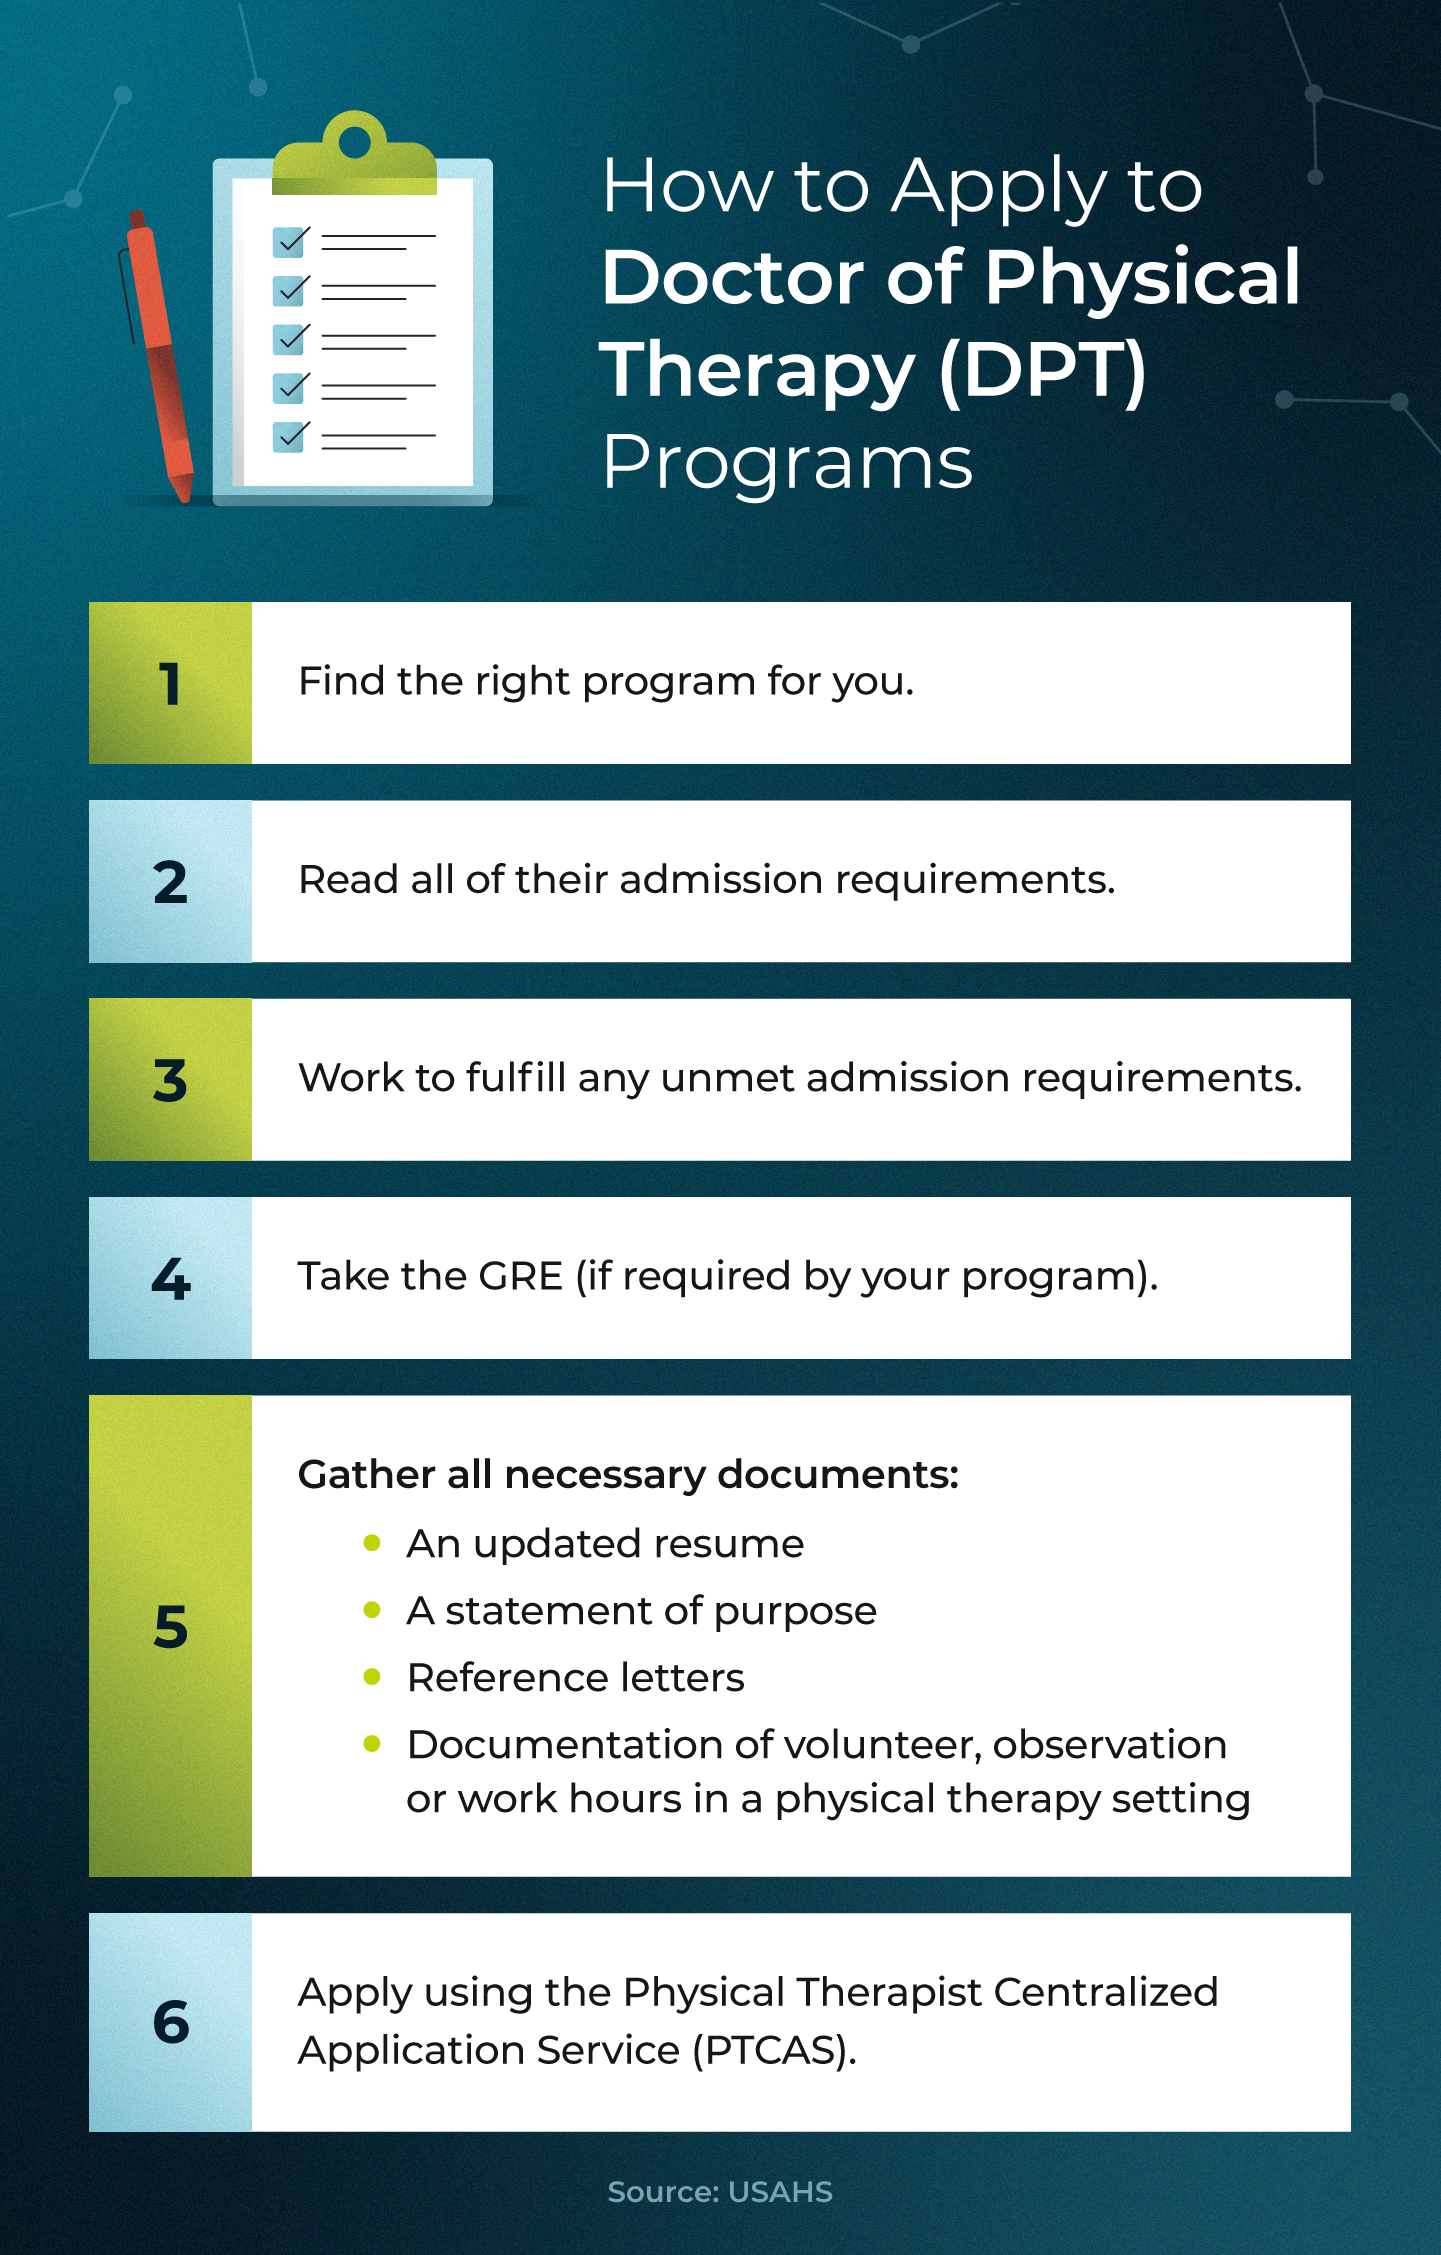 Steps for how to apply to Doctor of Physical Therapy (DPT) programs.